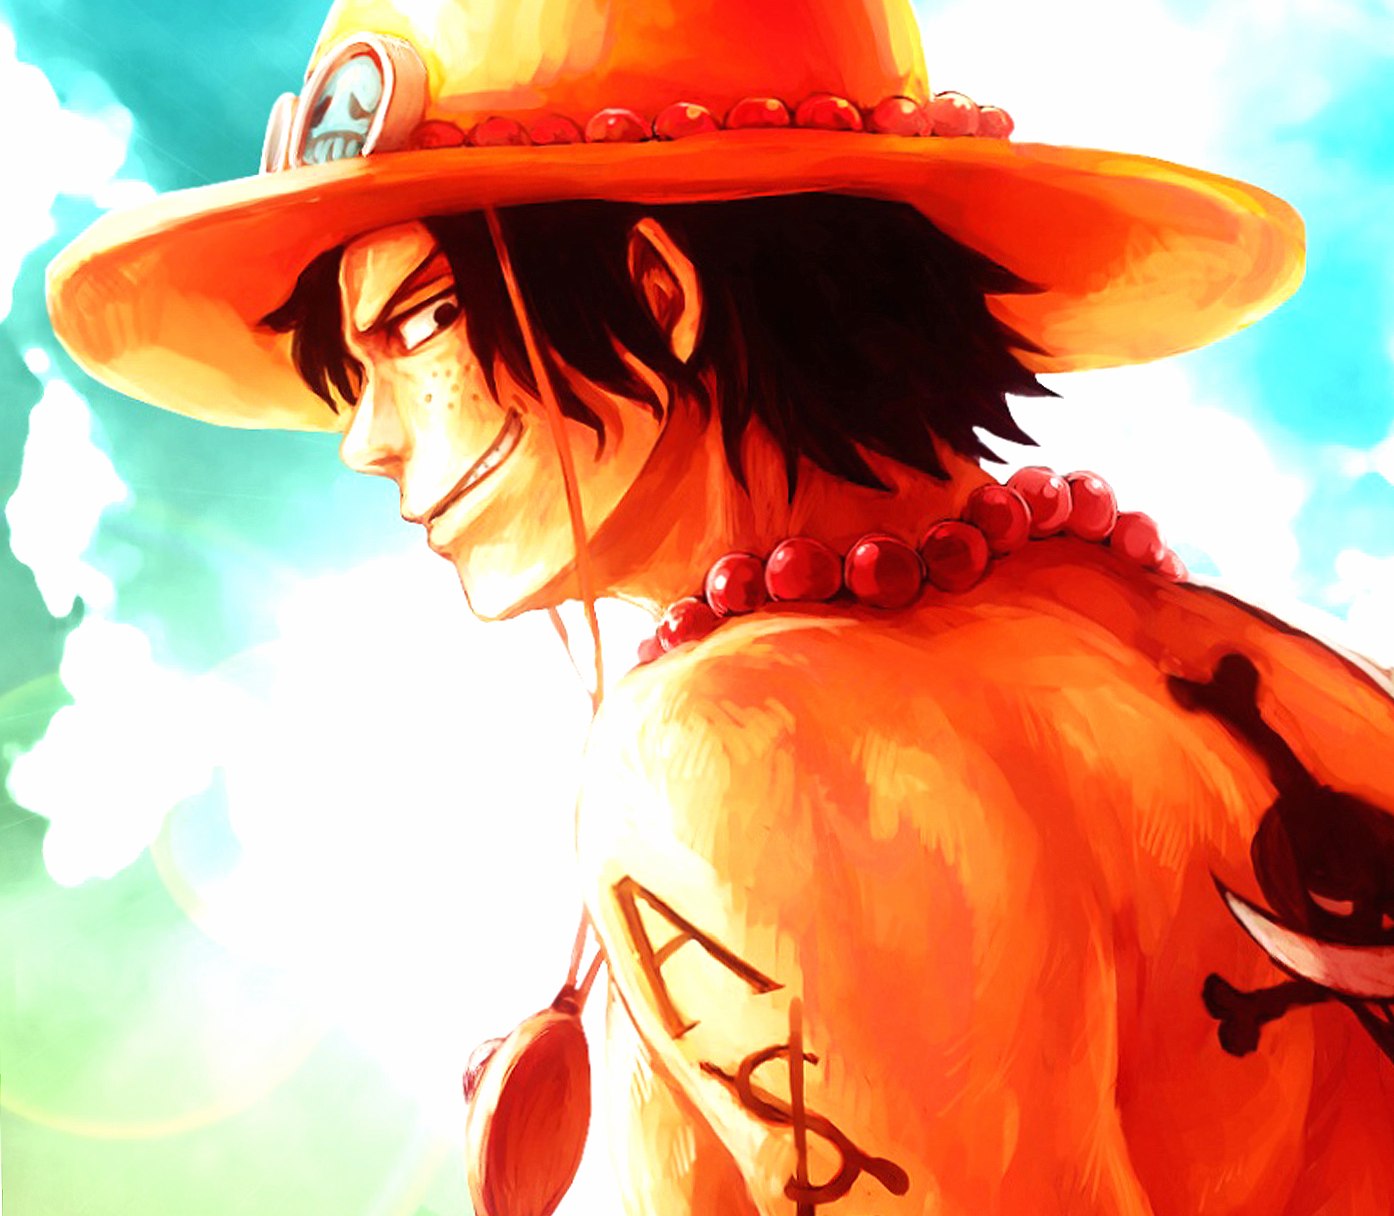 Portgas D Ace wallpapers HD quality